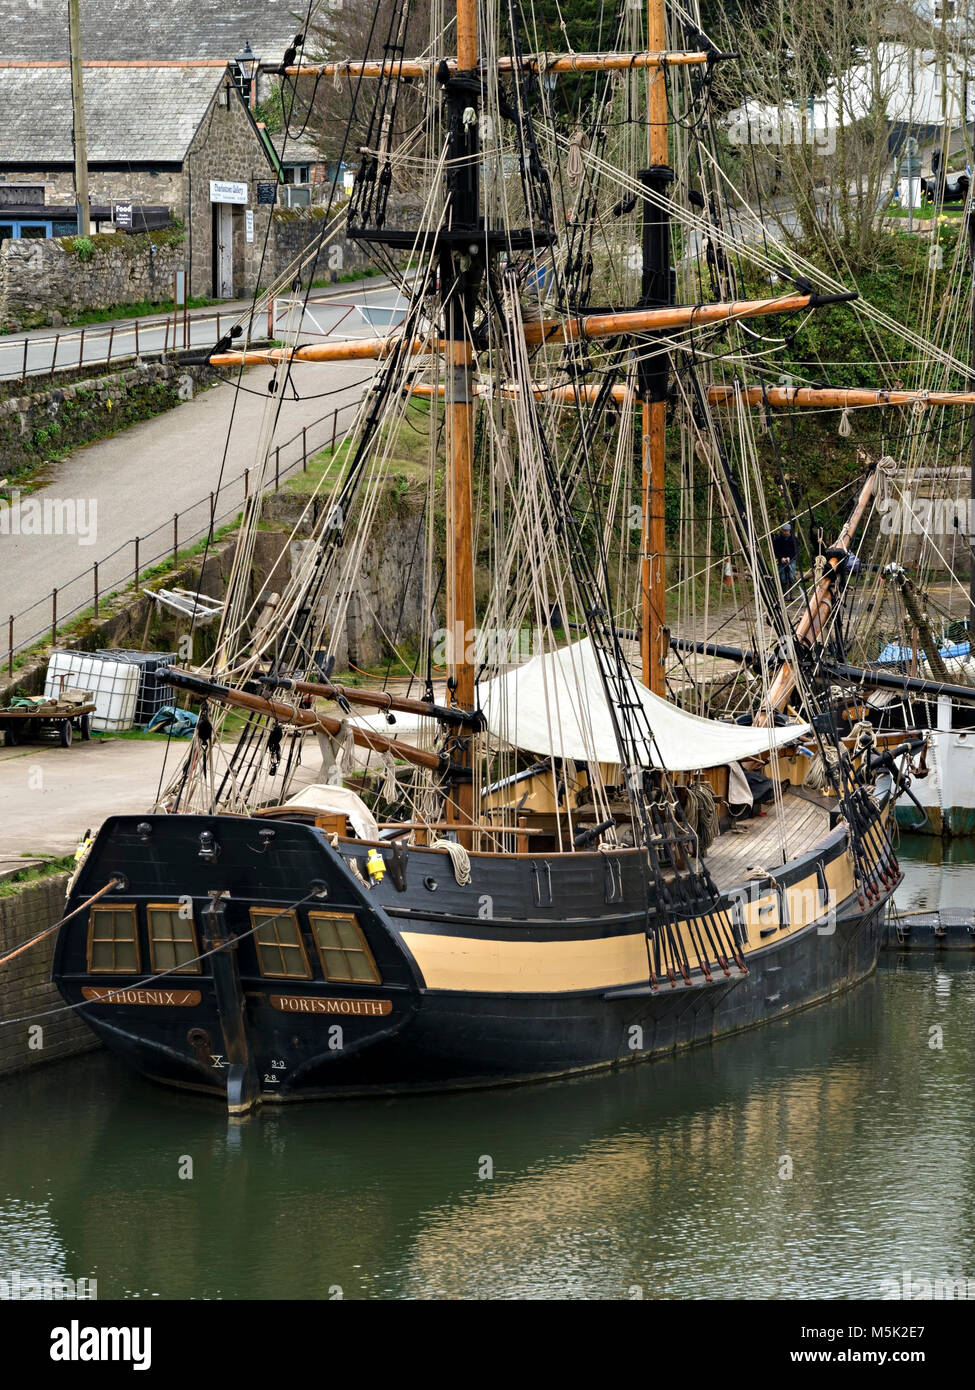 The Phoenix tall ship, wooden sailing ship moored in Charlestown Harbour, Cornwall, England. Charlestown was used as a location for filming Poldark. Stock Photo